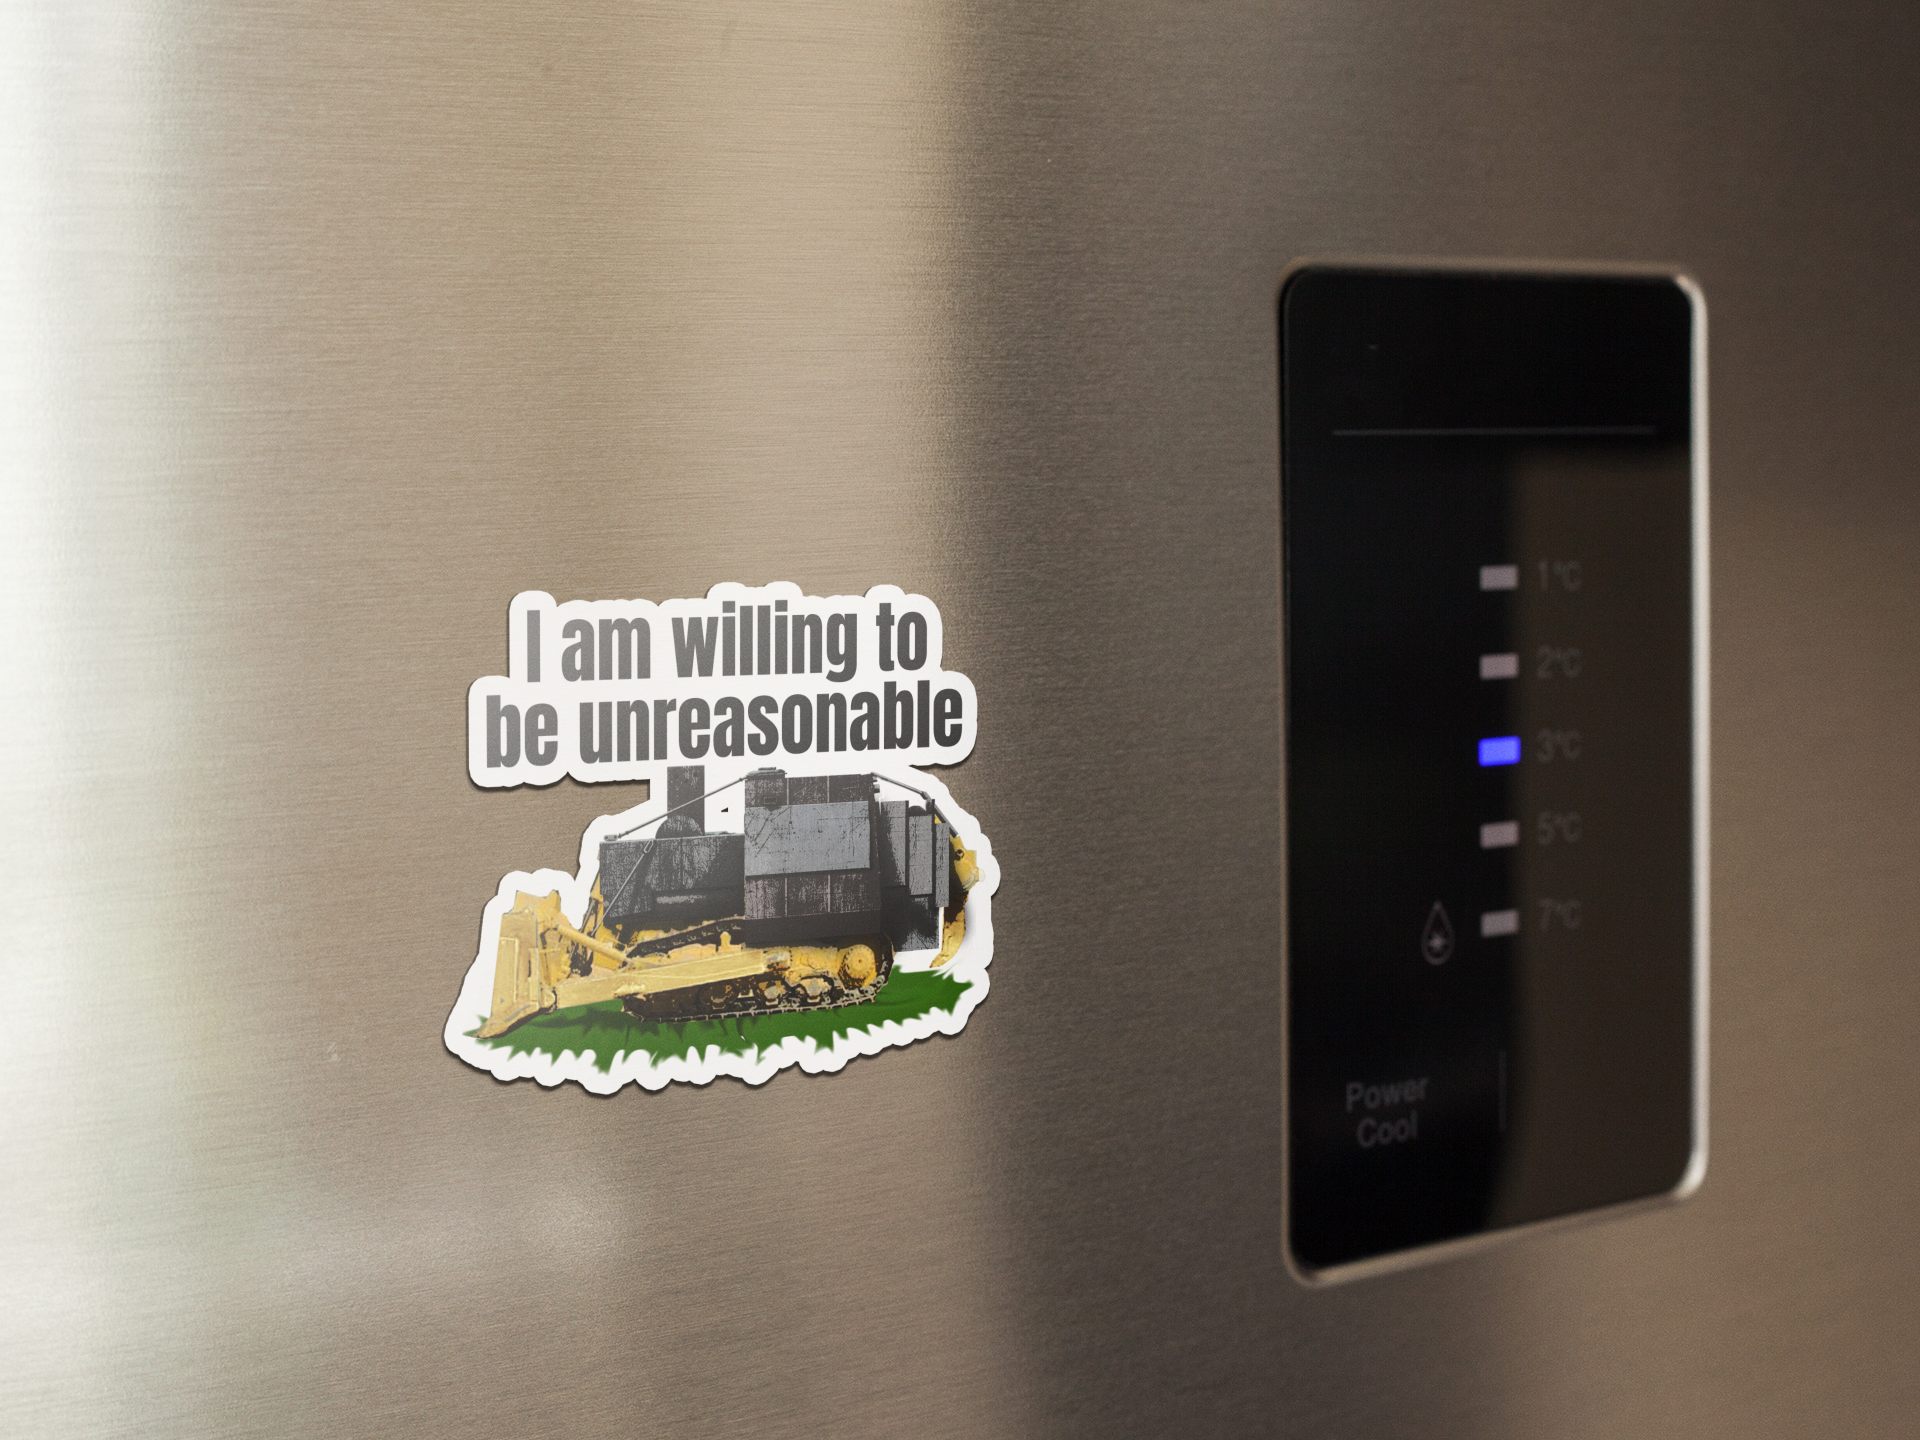 I am willing to be unreasonable refrigerator magnet gift for dad gift for her gift for him gift for mom gift for wife liberal tears libertarian liberty liberty snake